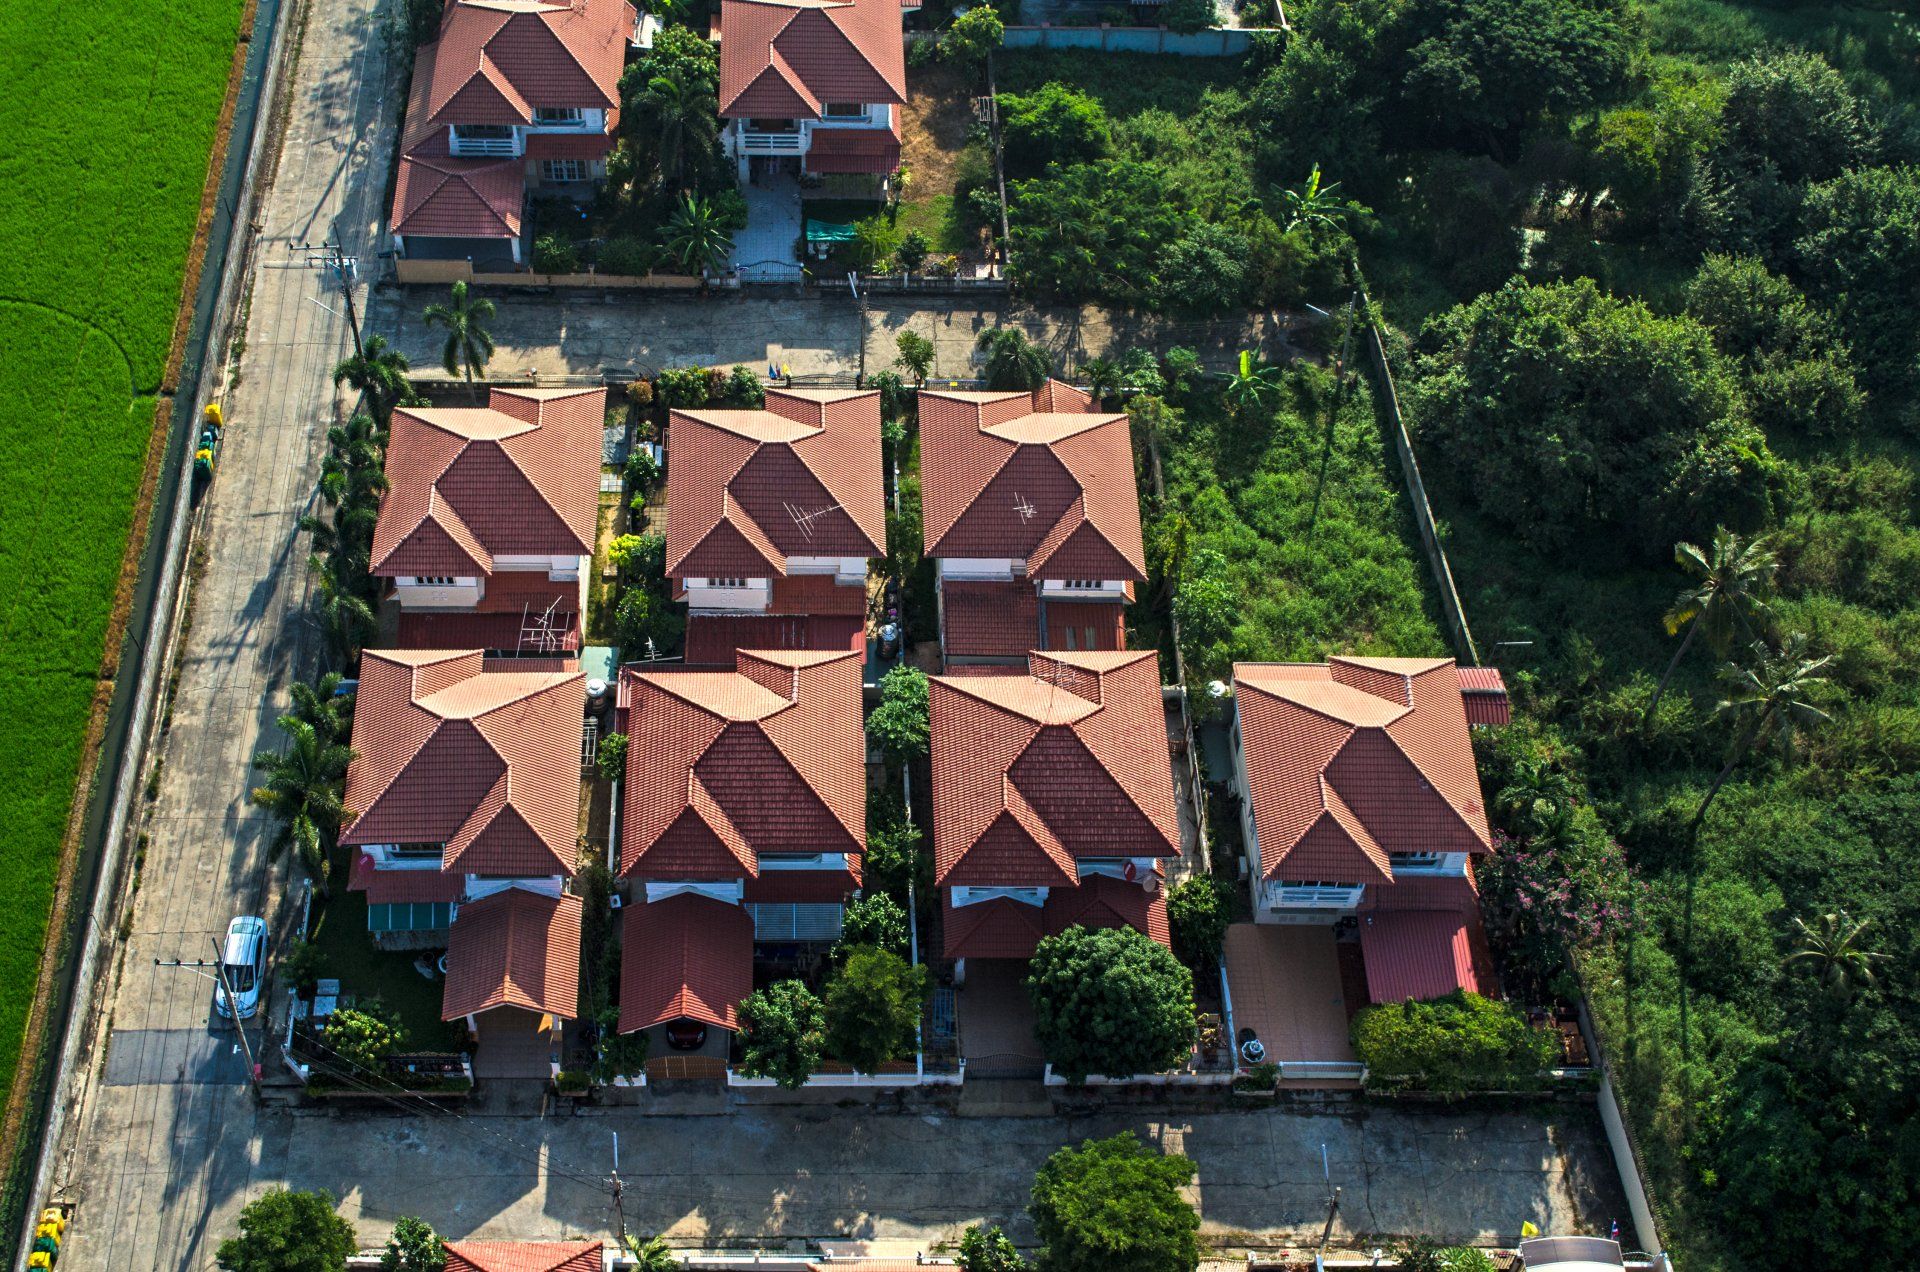 an aerial view of a residential area with red tile roofs